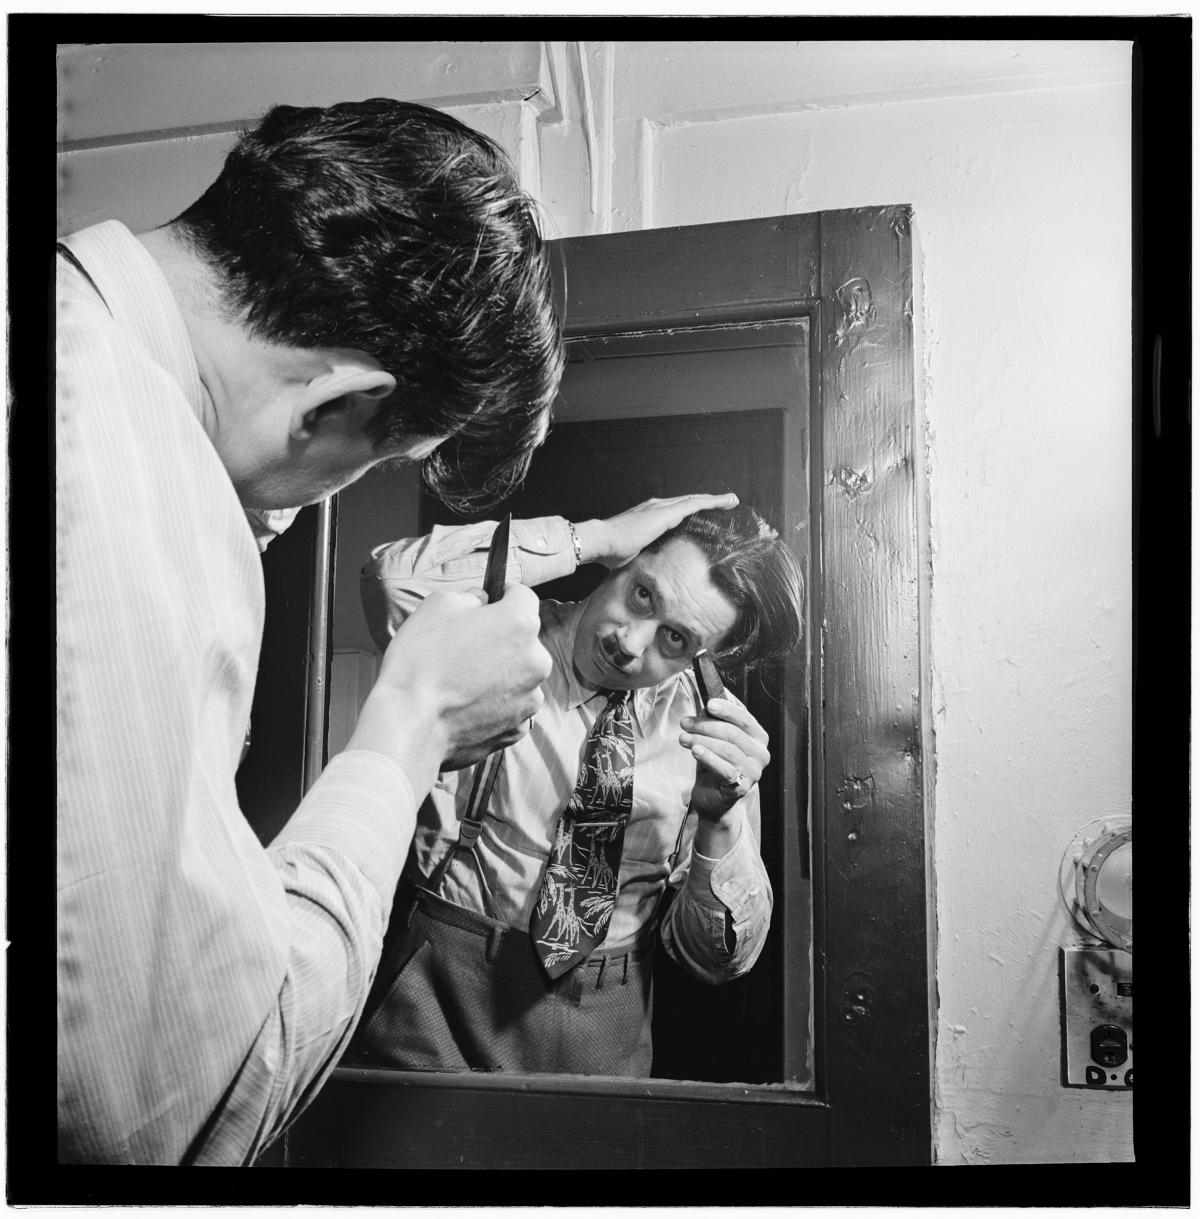 Calloway, looking into a mirror with his back to the viewer, shaving